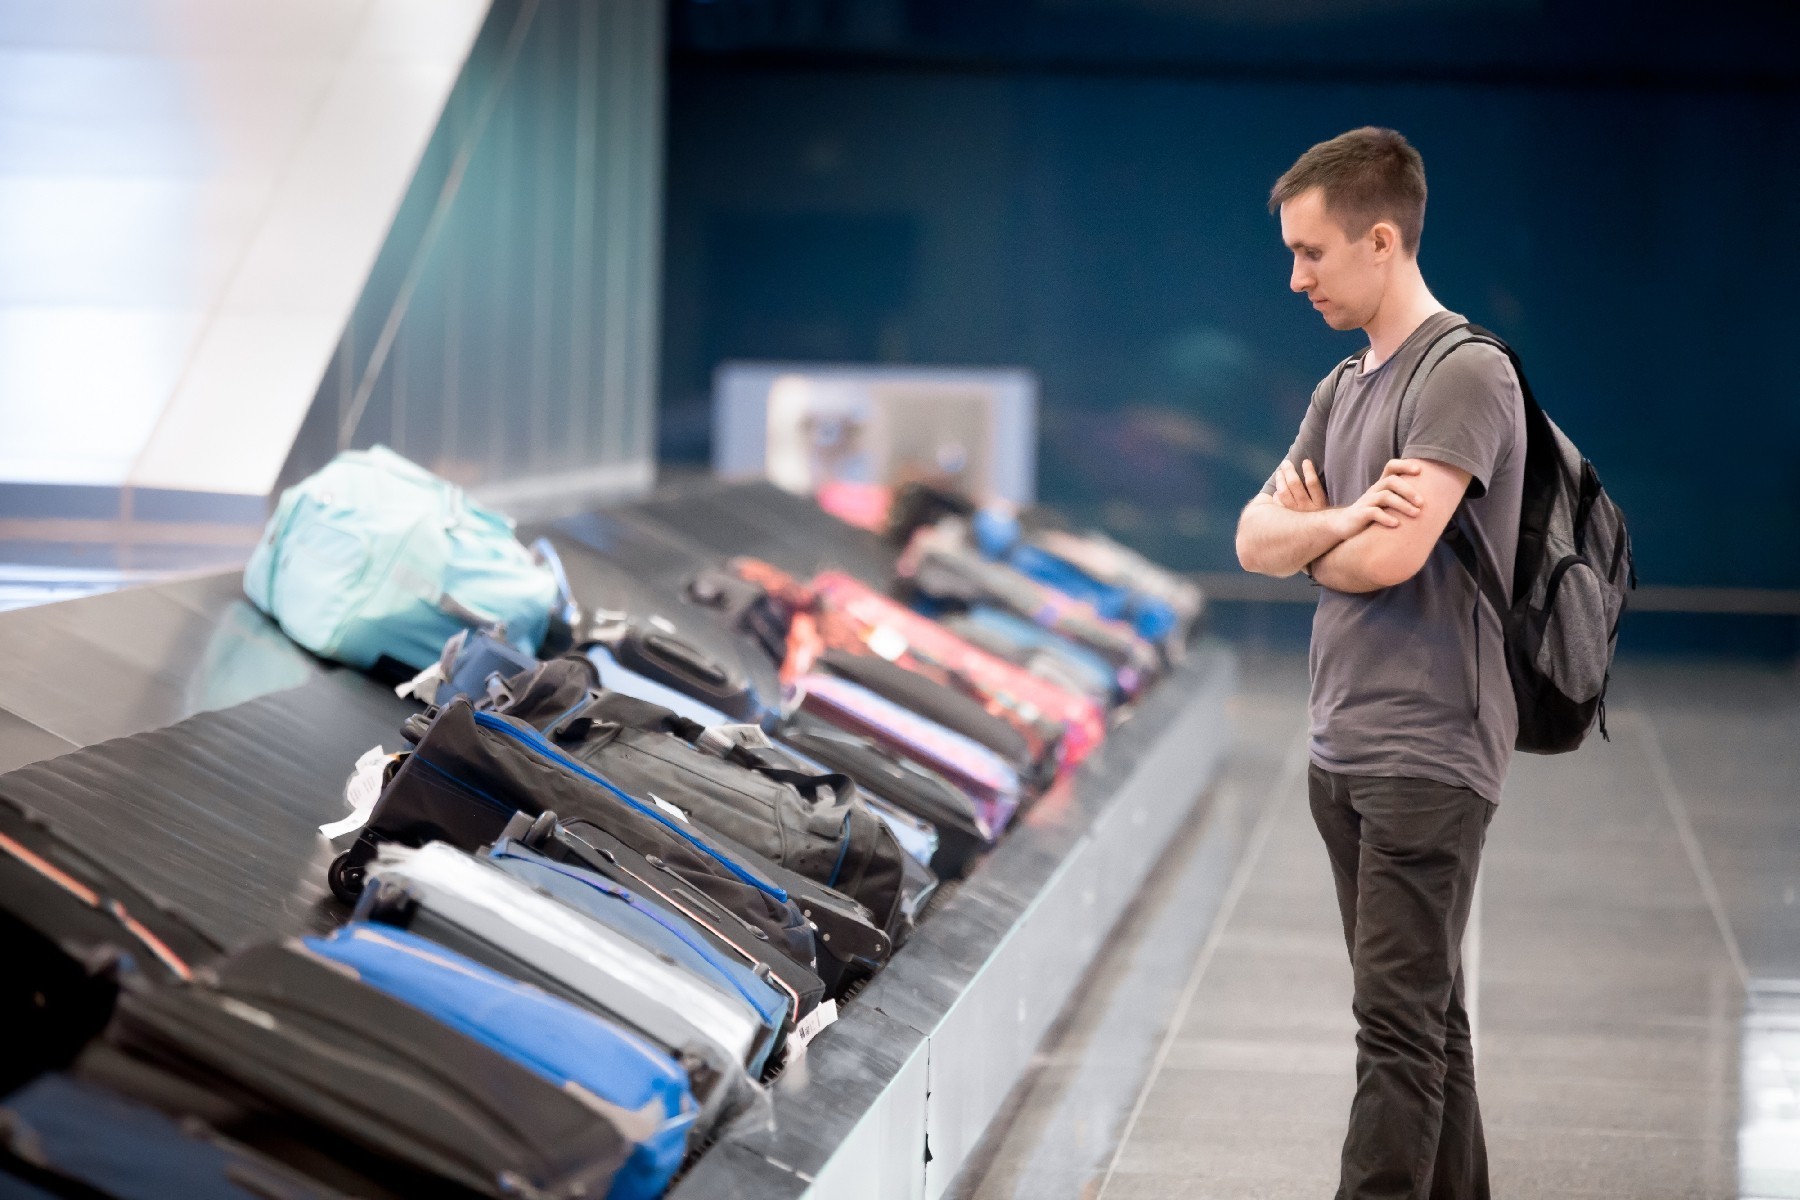 <p>Airlines are able to pay up to a few thousand dollars for <a href="https://airpassengerrights.ca/en/practical-guides/baggage?gclid=Cj0KCQjwjvaYBhDlARIsAO8PkE2W1aJULEhBZyfFTT6Py0k5GN7w2q_PO97M3ptCXwCmMzoIRQxivygaAmeUEALw_wcB" rel="noreferrer noopener">lost luggage and contents</a>, but report your MIA bags as soon as possible. Many airlines have tight deadlines for filing claims. Submit yours before you leave the airport, and keep track of all expenses associated with the loss so that you can be compensated for those too.</p>